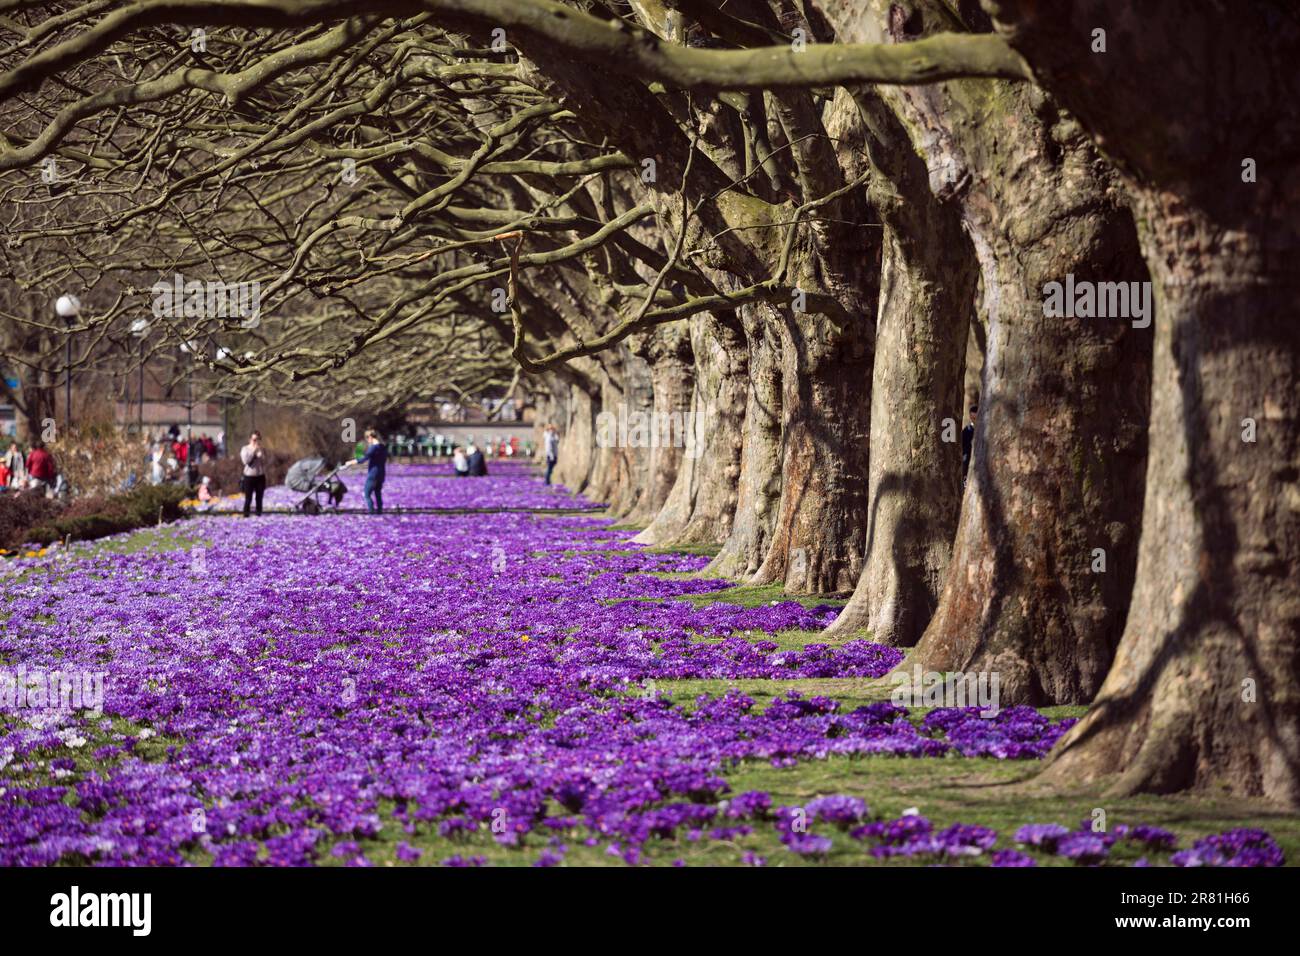 Poland, Szczecin - Polish spring, blooming crocuses, purple flowers in the city park and plane tree alley, beautiful spring Stock Photo